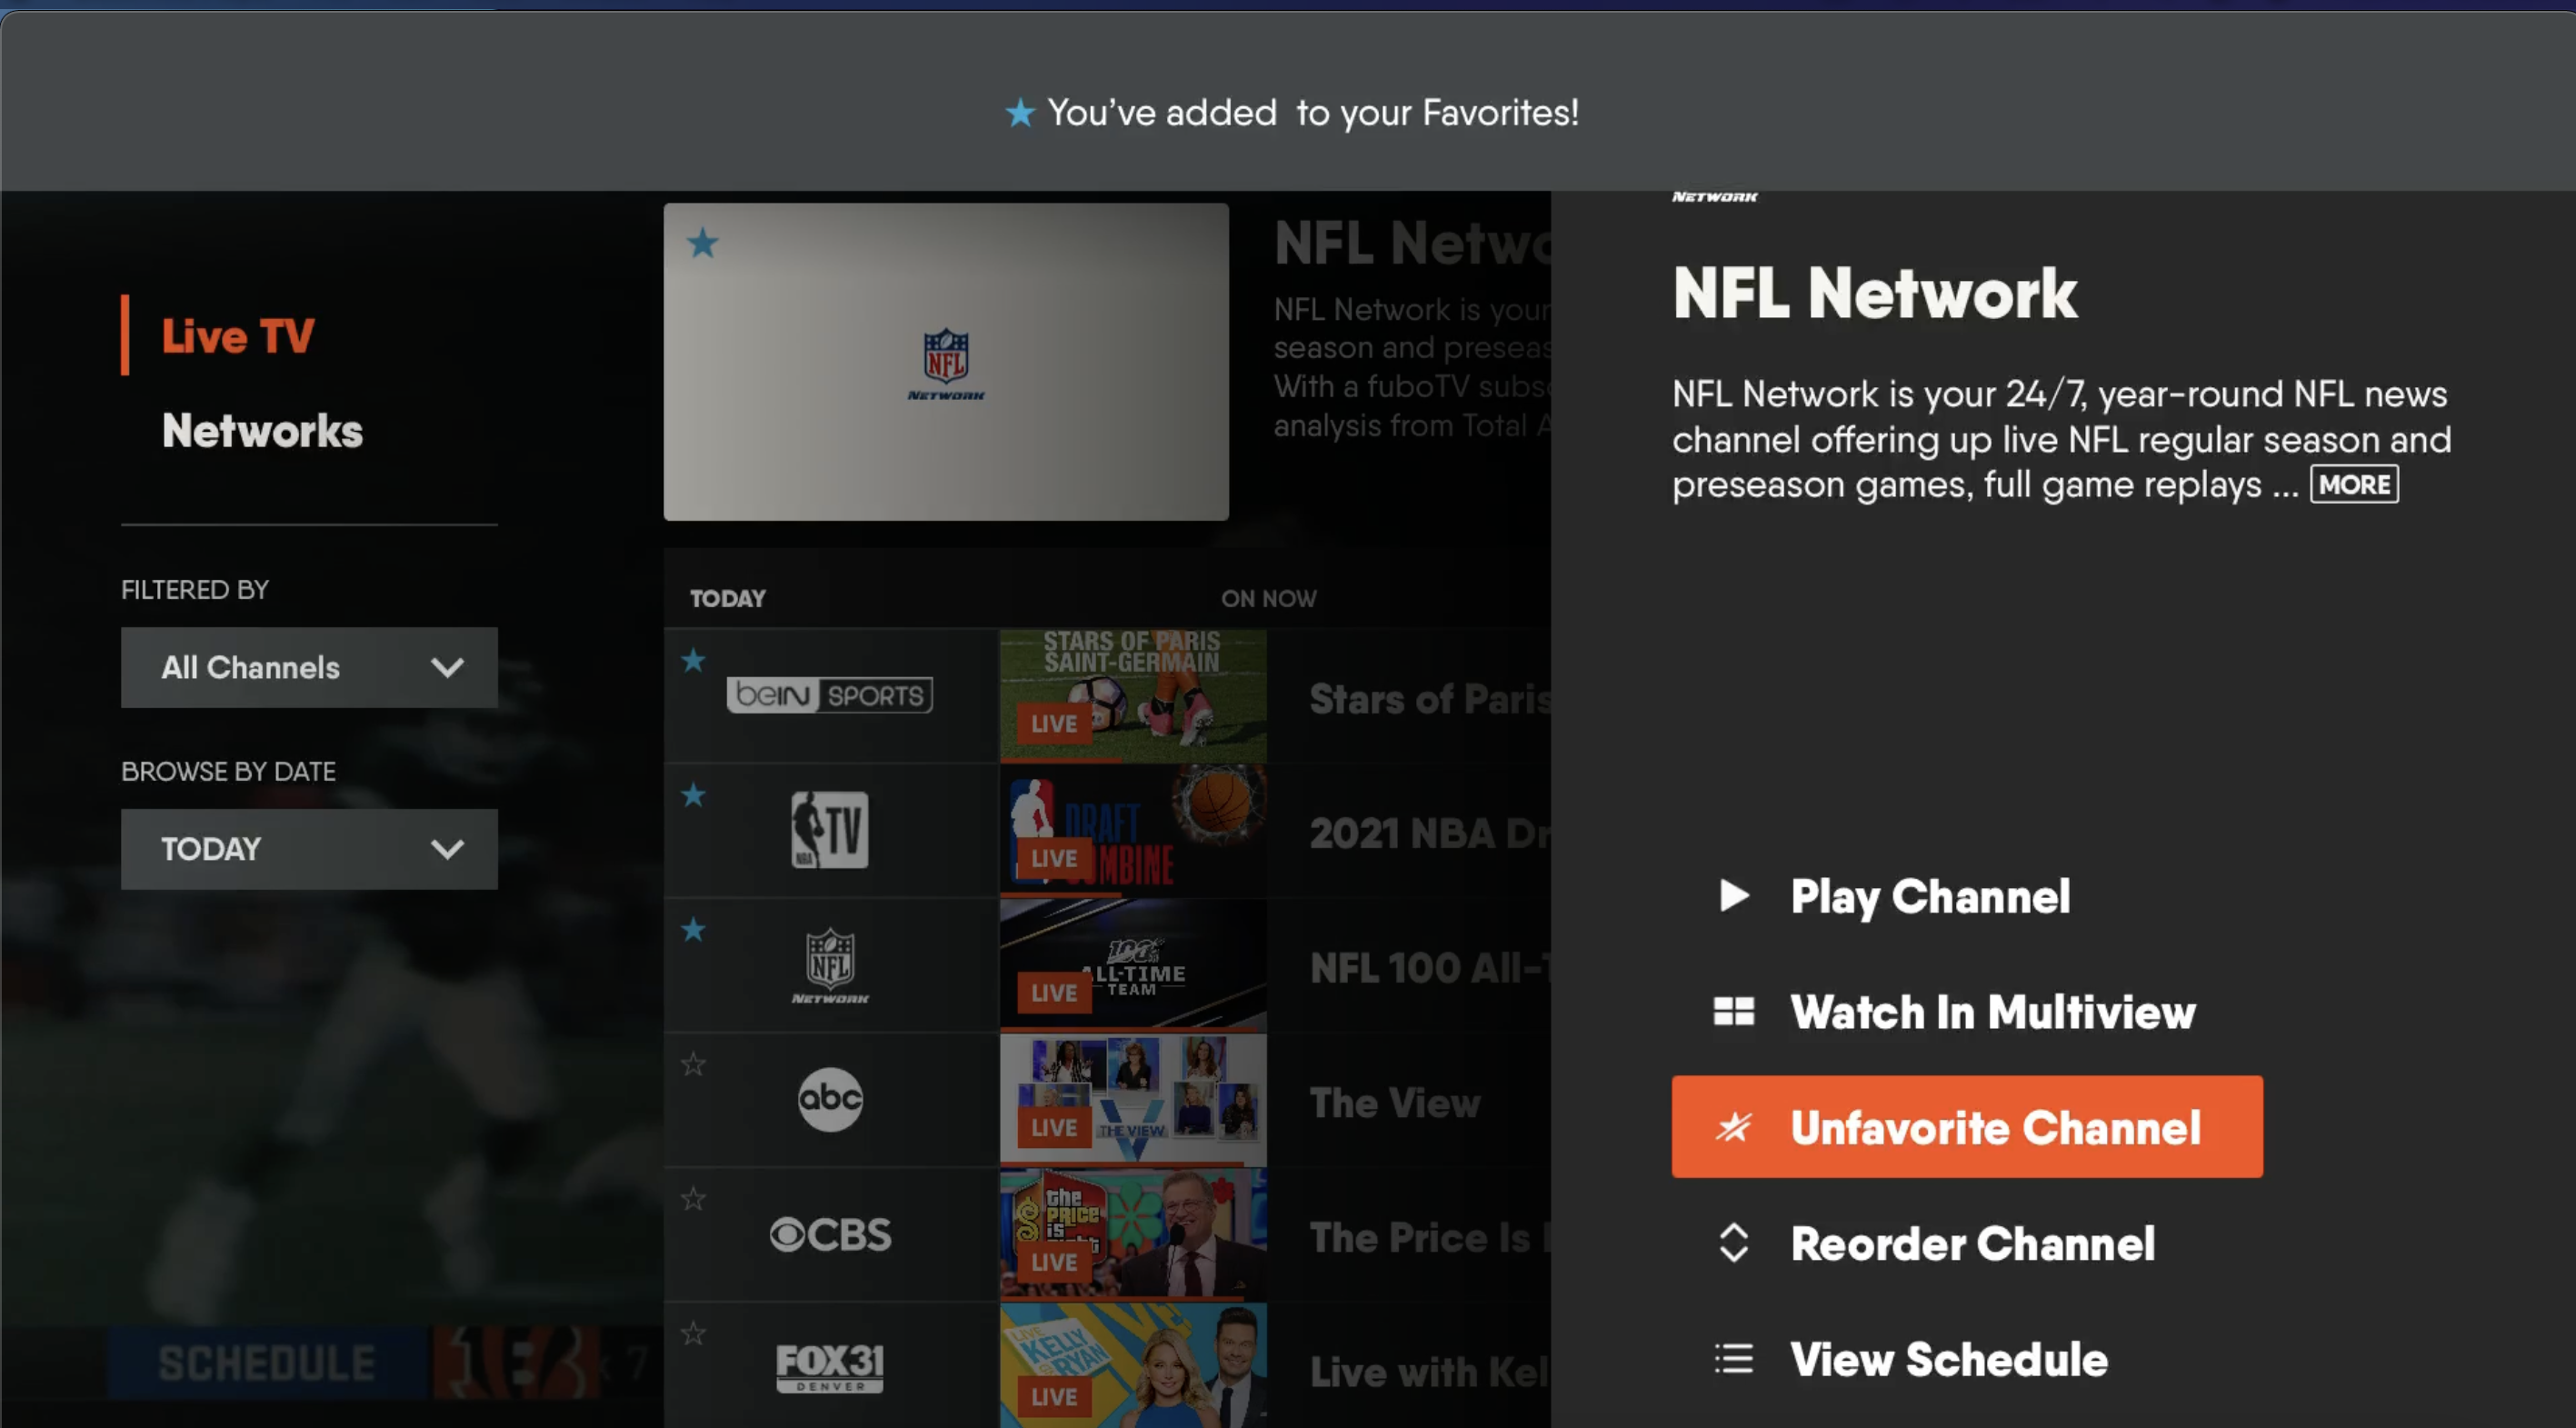 GUIDE screen for the FuboTV app on Apple TV with channel information shown and UNFAVORITE CHANNEL highlighted; banner at the top informing that a channel has been added to favorites